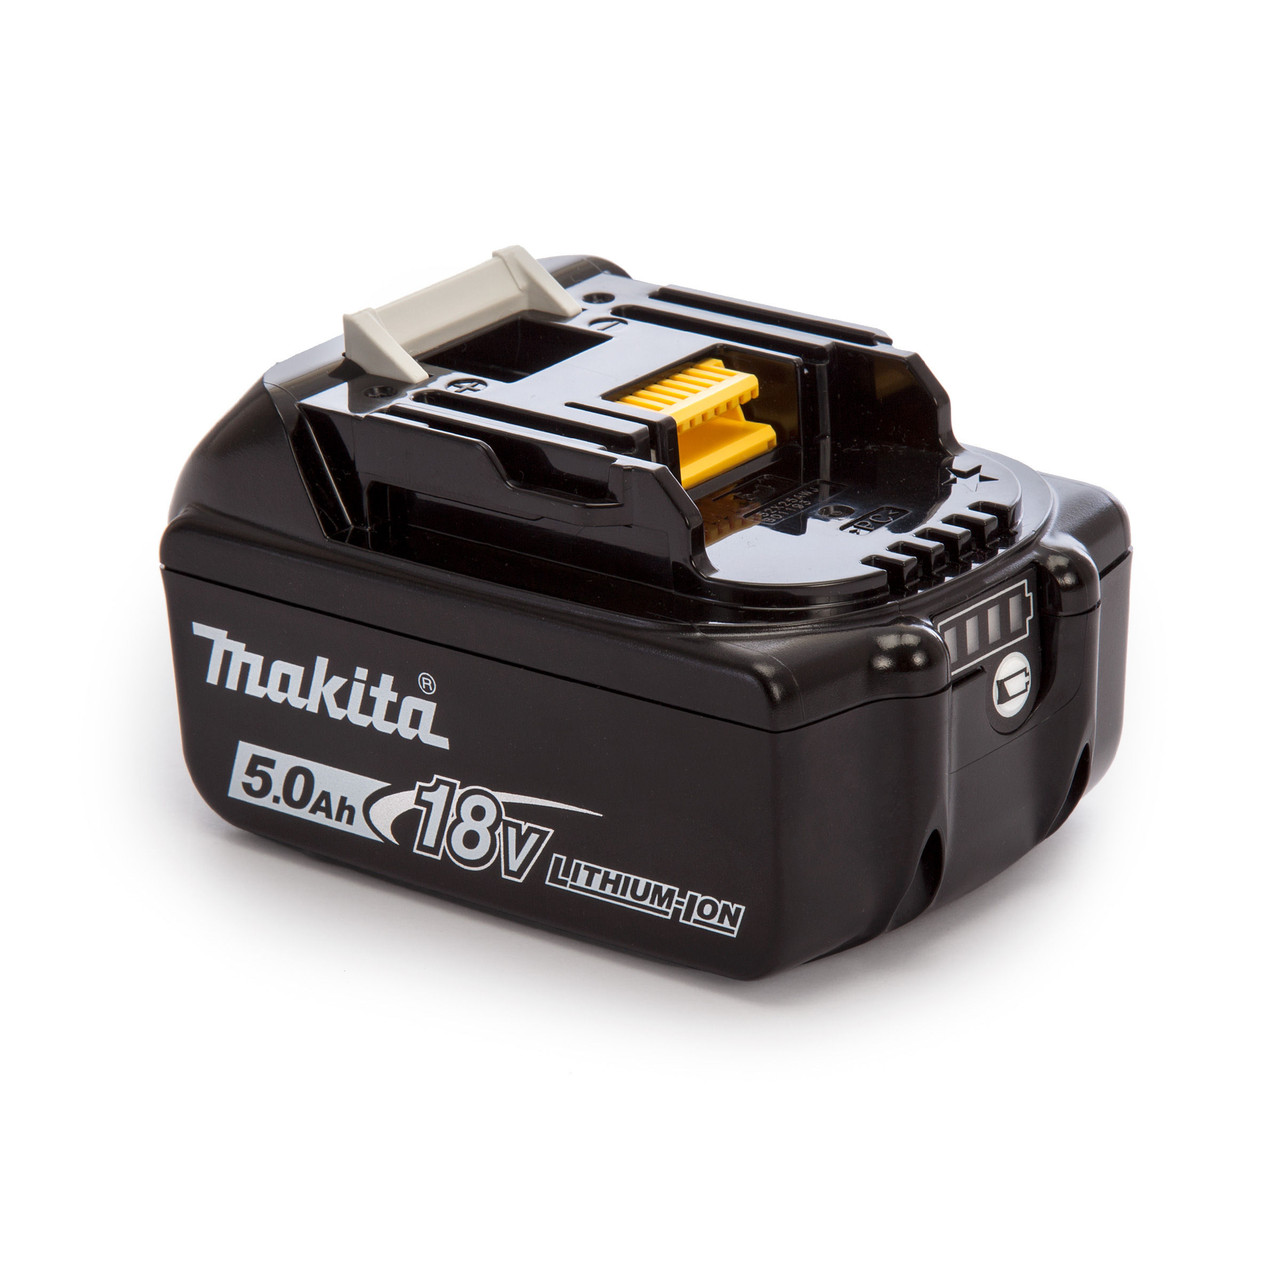 Makita 18V Tools and the Batteries That Power Them - Toolstop